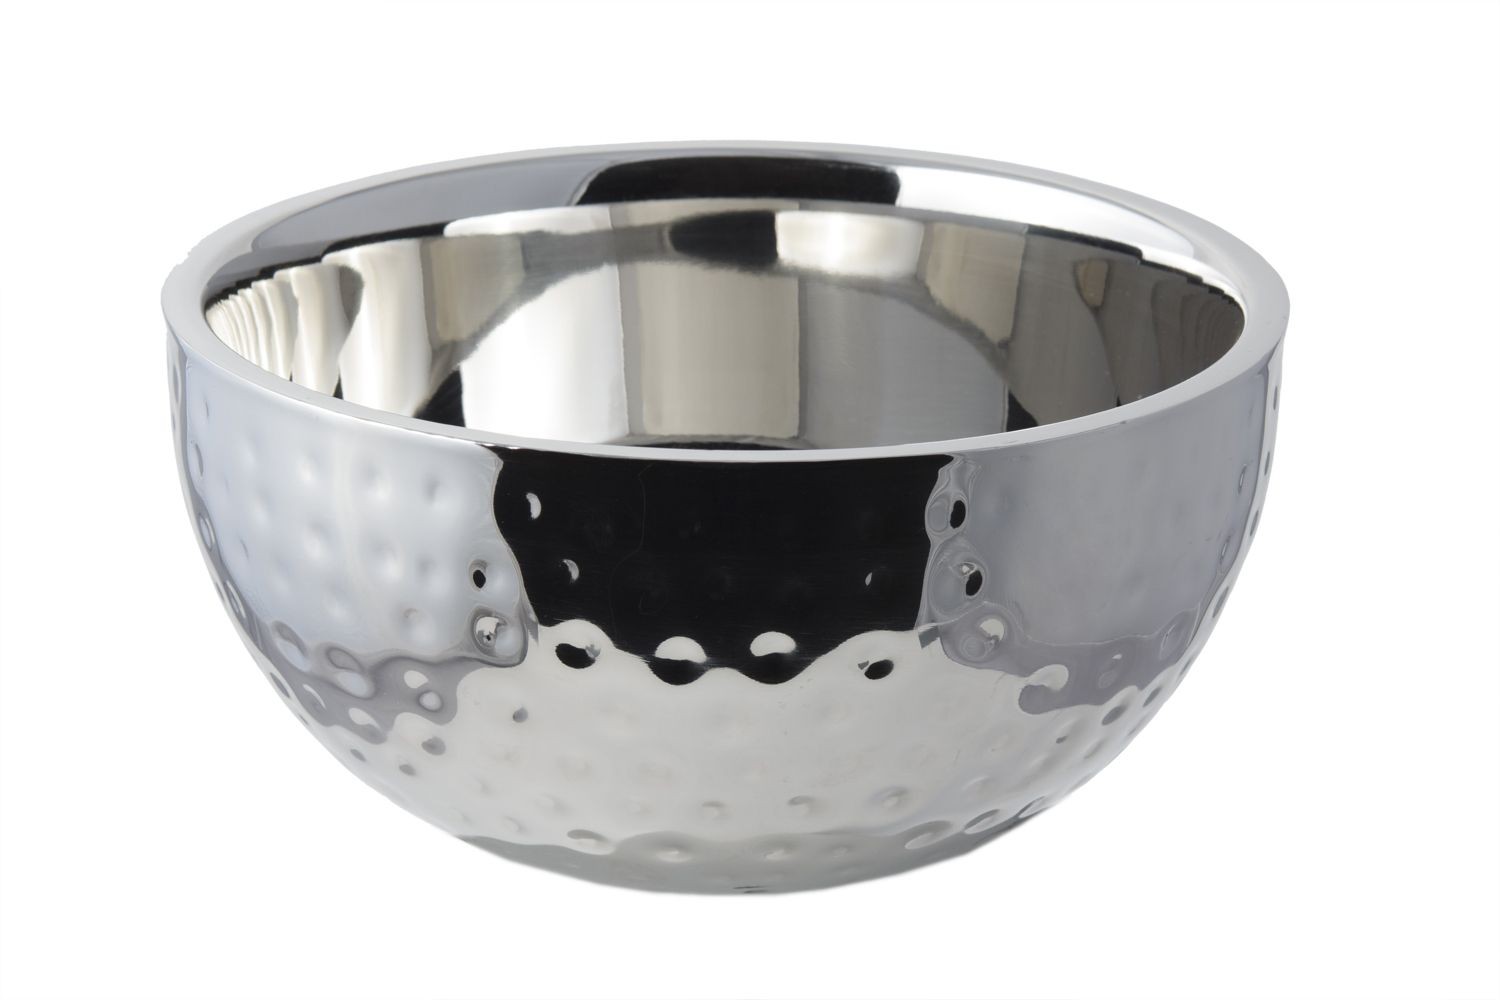 Bon Chef 61259 Double Walled Bowl with Hammered Finish, 2 Qt. 8 oz.